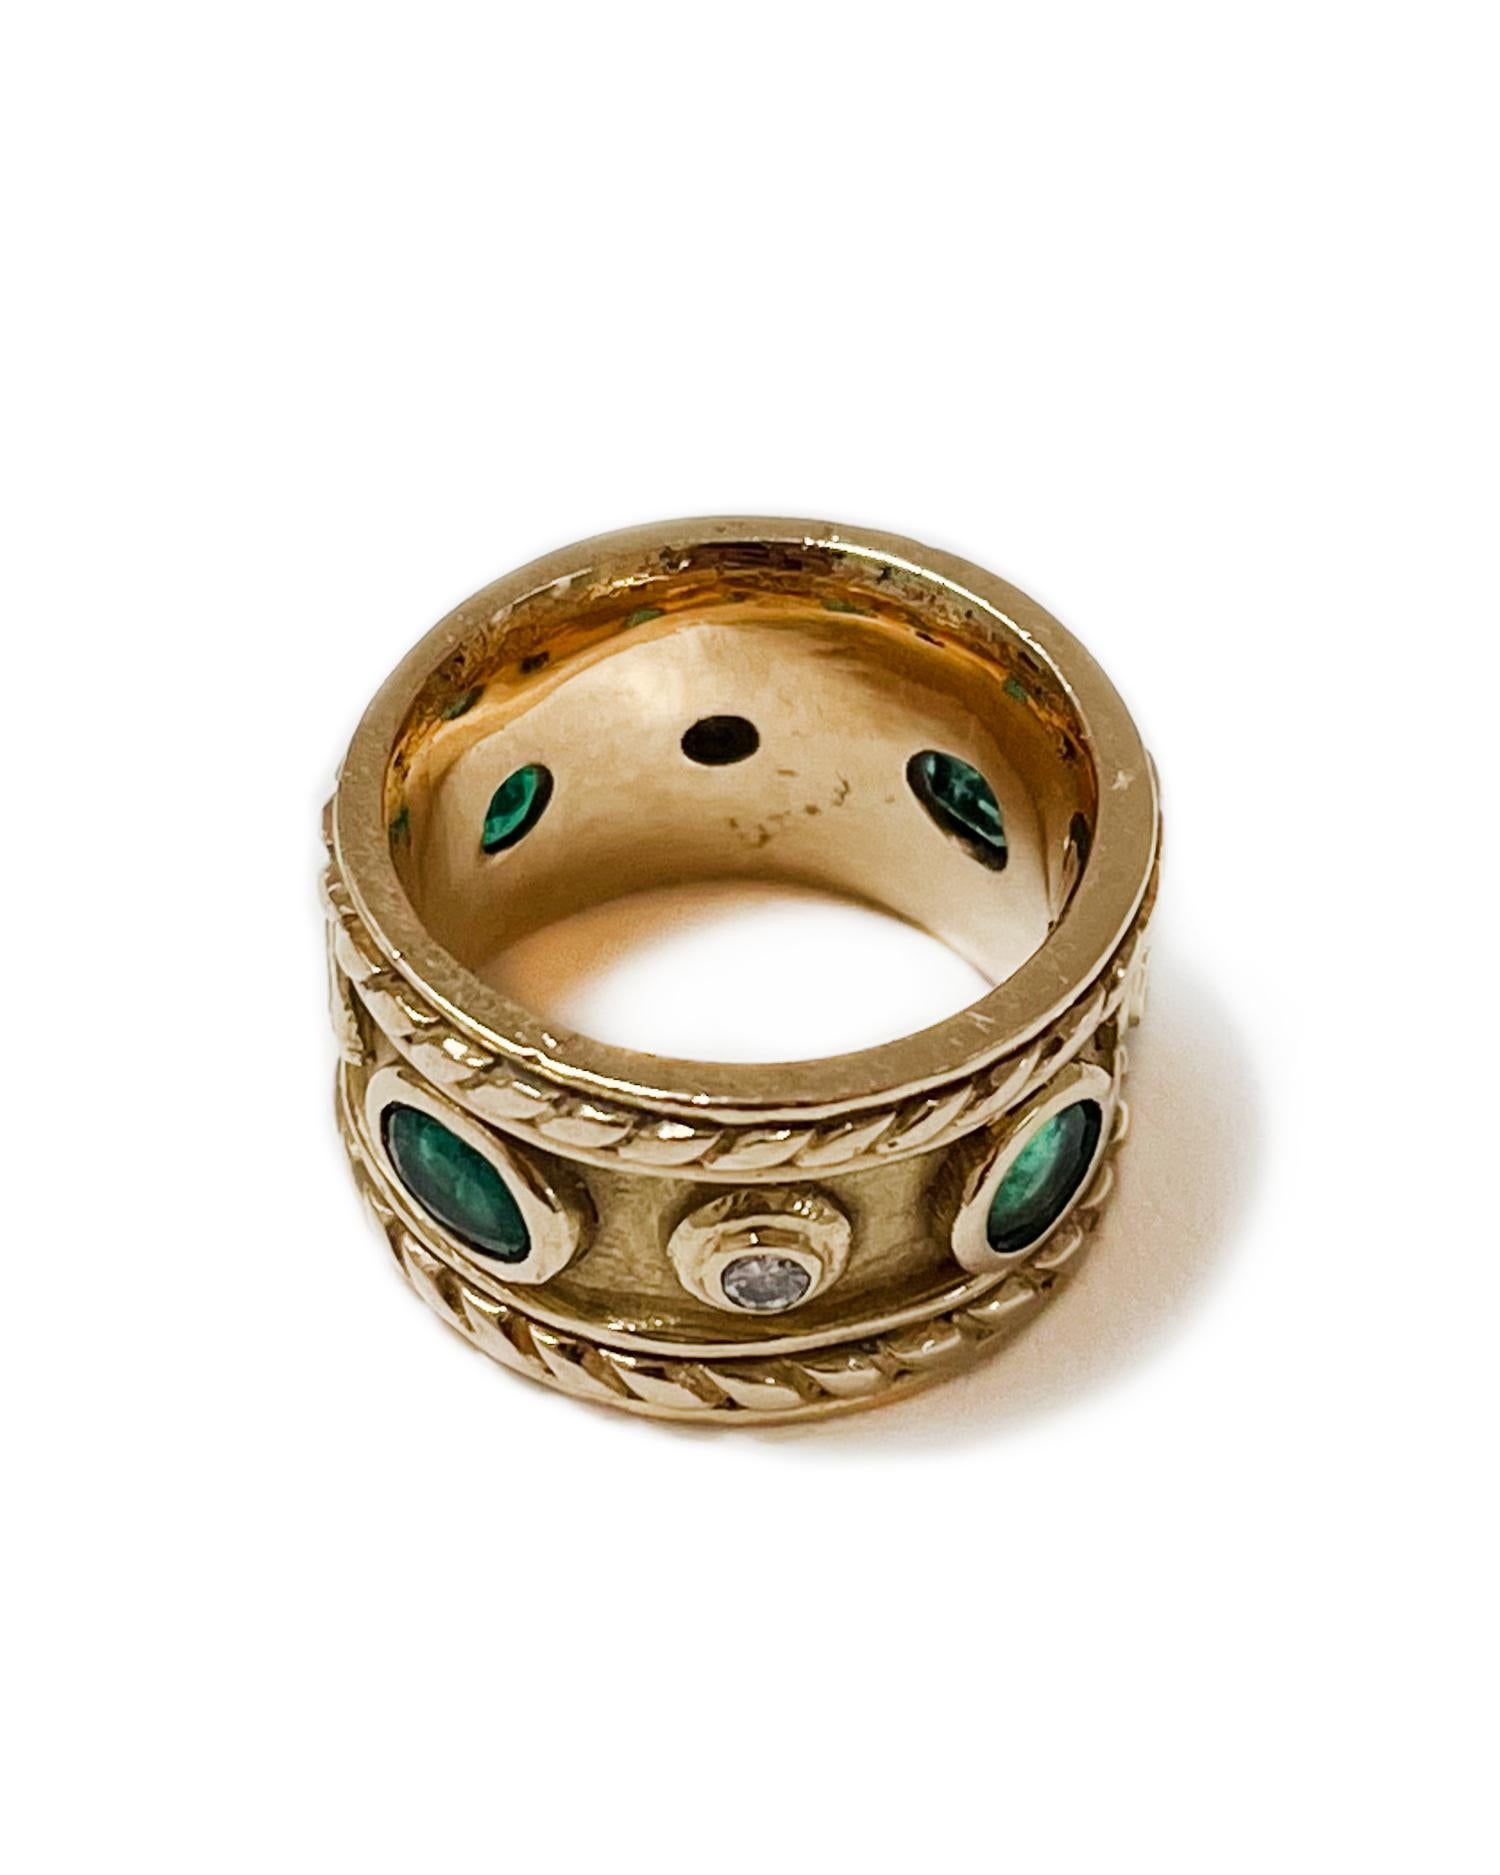 Contemporary Royalty Band Ring in Emerald, Diamond and 14k Yellow Gold